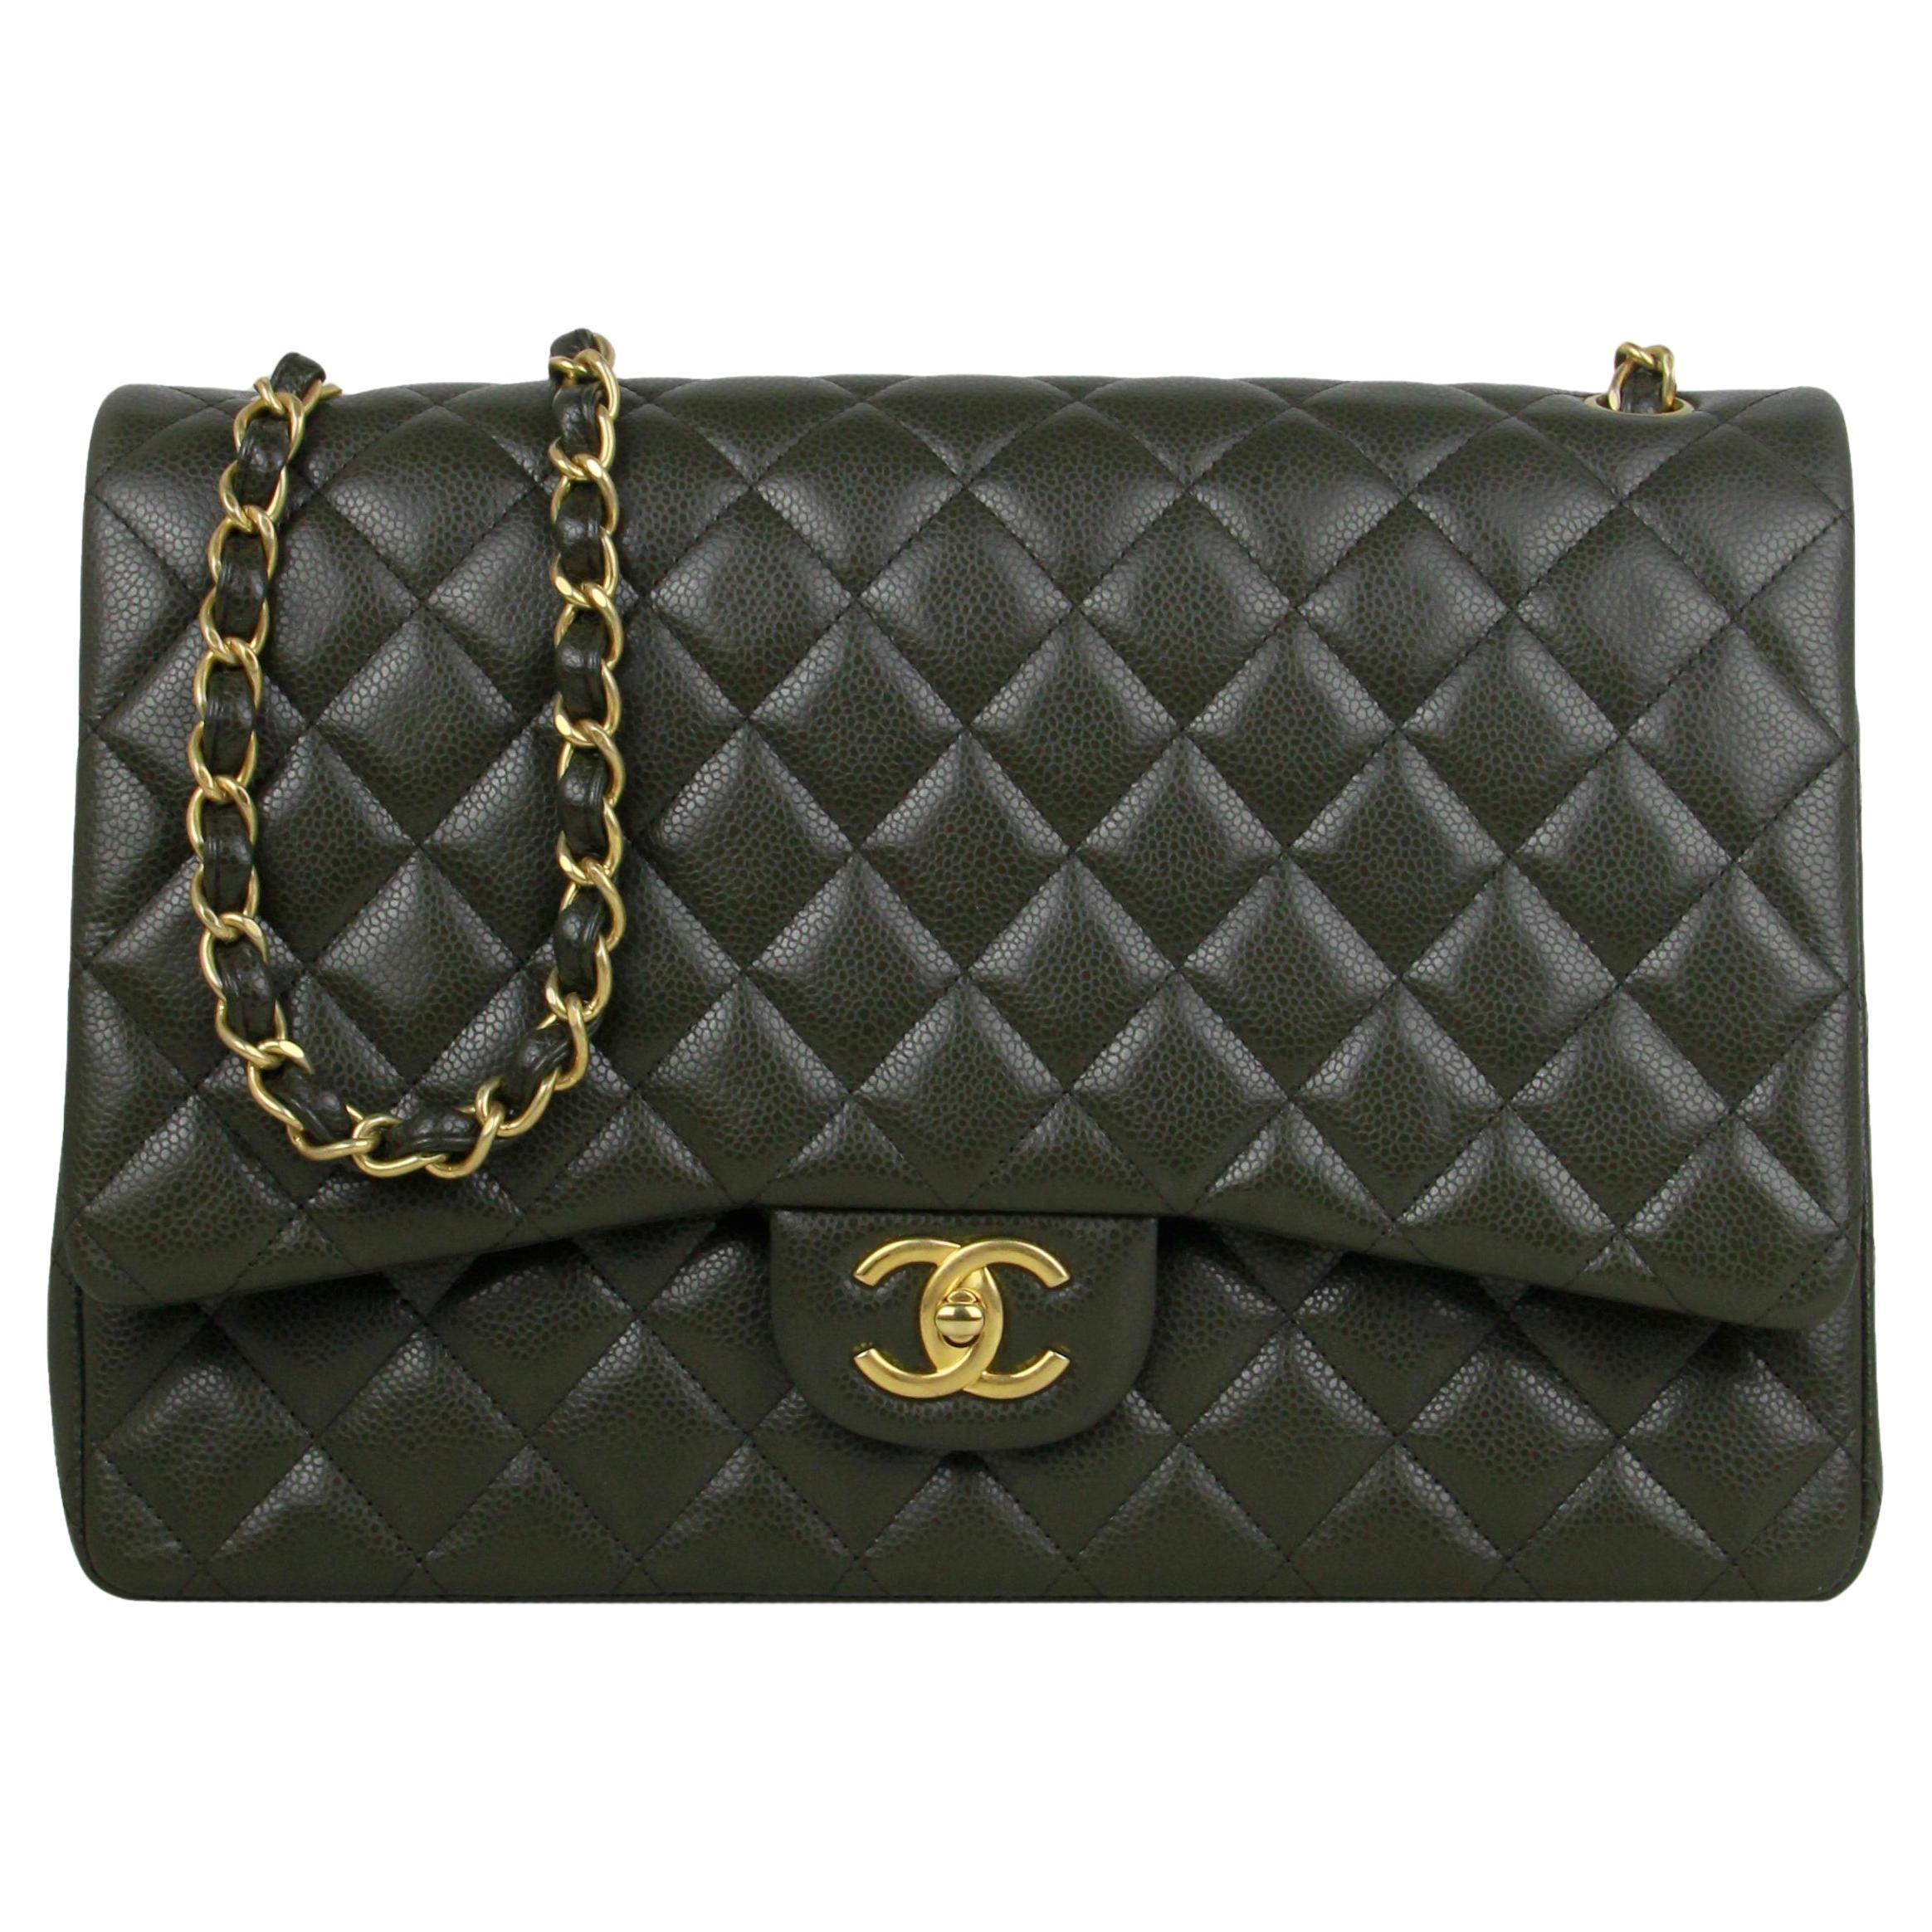 Chanel Black Lambskin Leather Quilted Single Flap Maxi Bag For